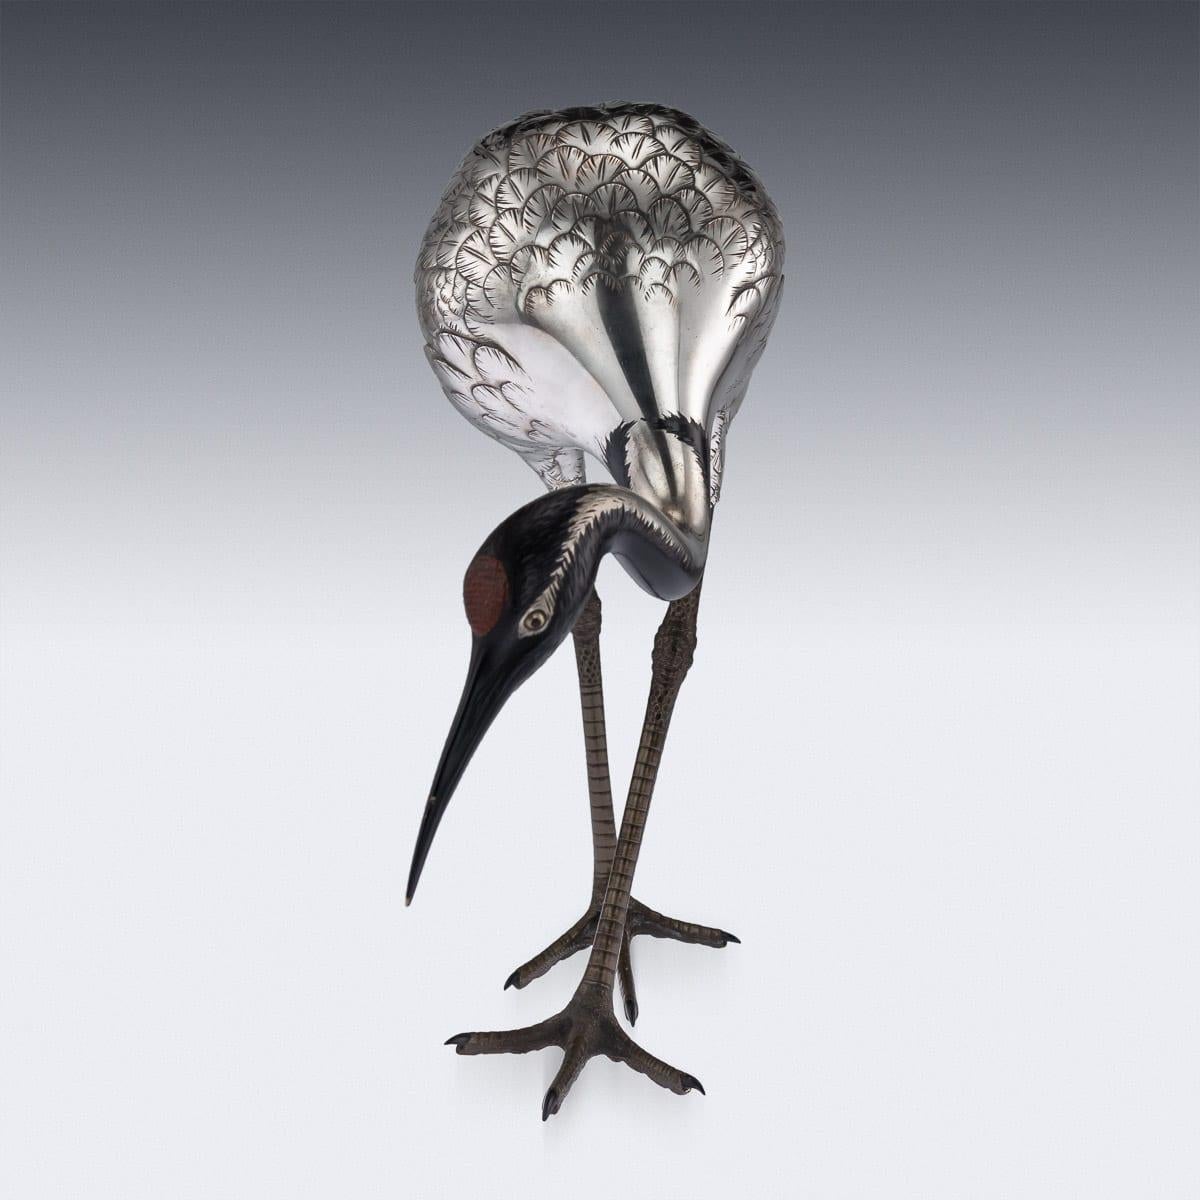 Antique early 20th century Japanese Meiji period very fine silvered figure of a egret. The naturalistically modeled bird with gold set eyes, with realistic engraved feathers, applied with niello decoration to the head and back. Apparently